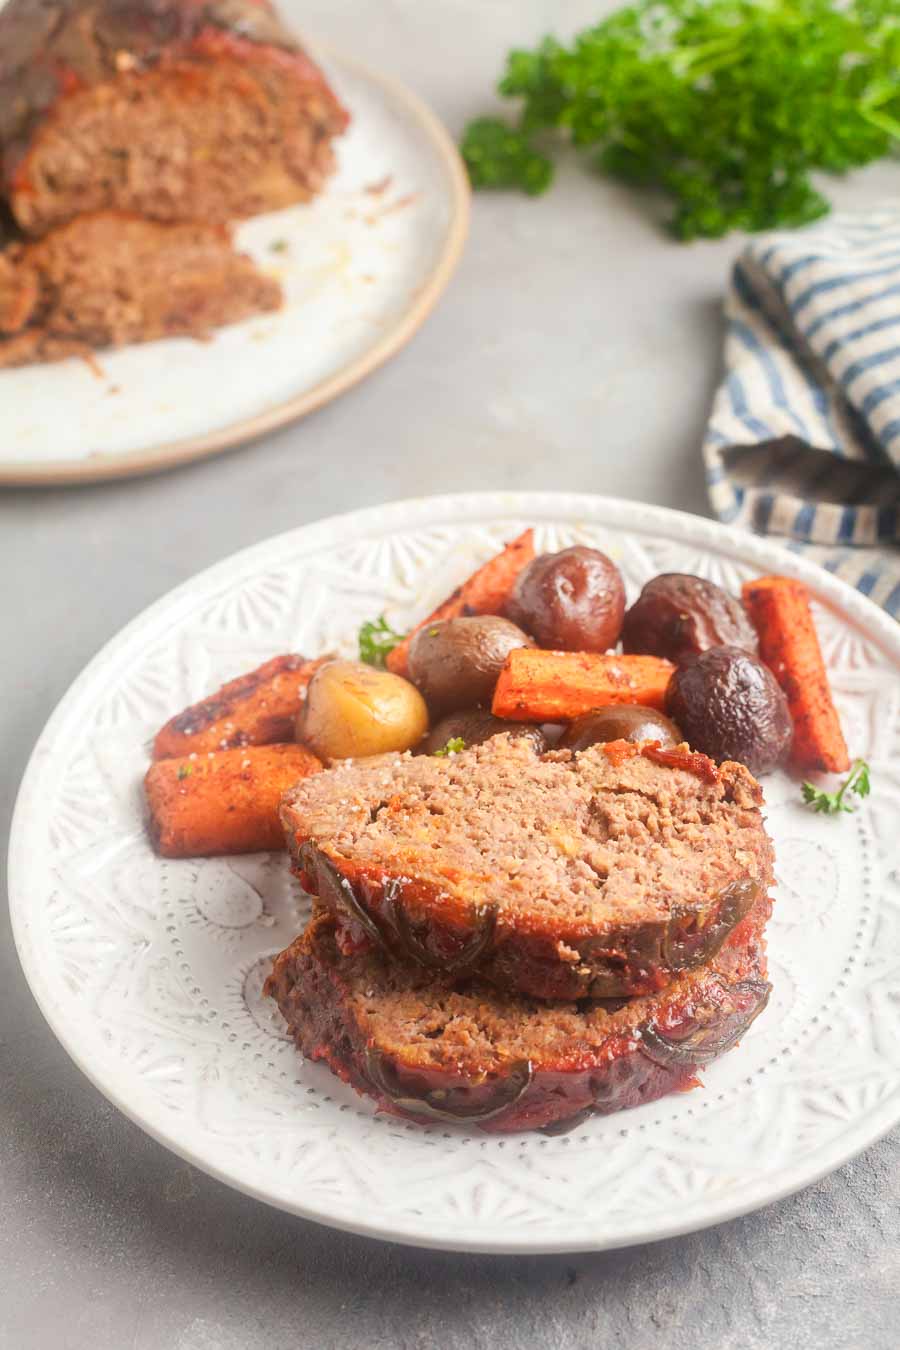 https://www.healthy-delicious.com/wp-content/uploads/2021/01/Thai-Meatloaf-5-1.jpg